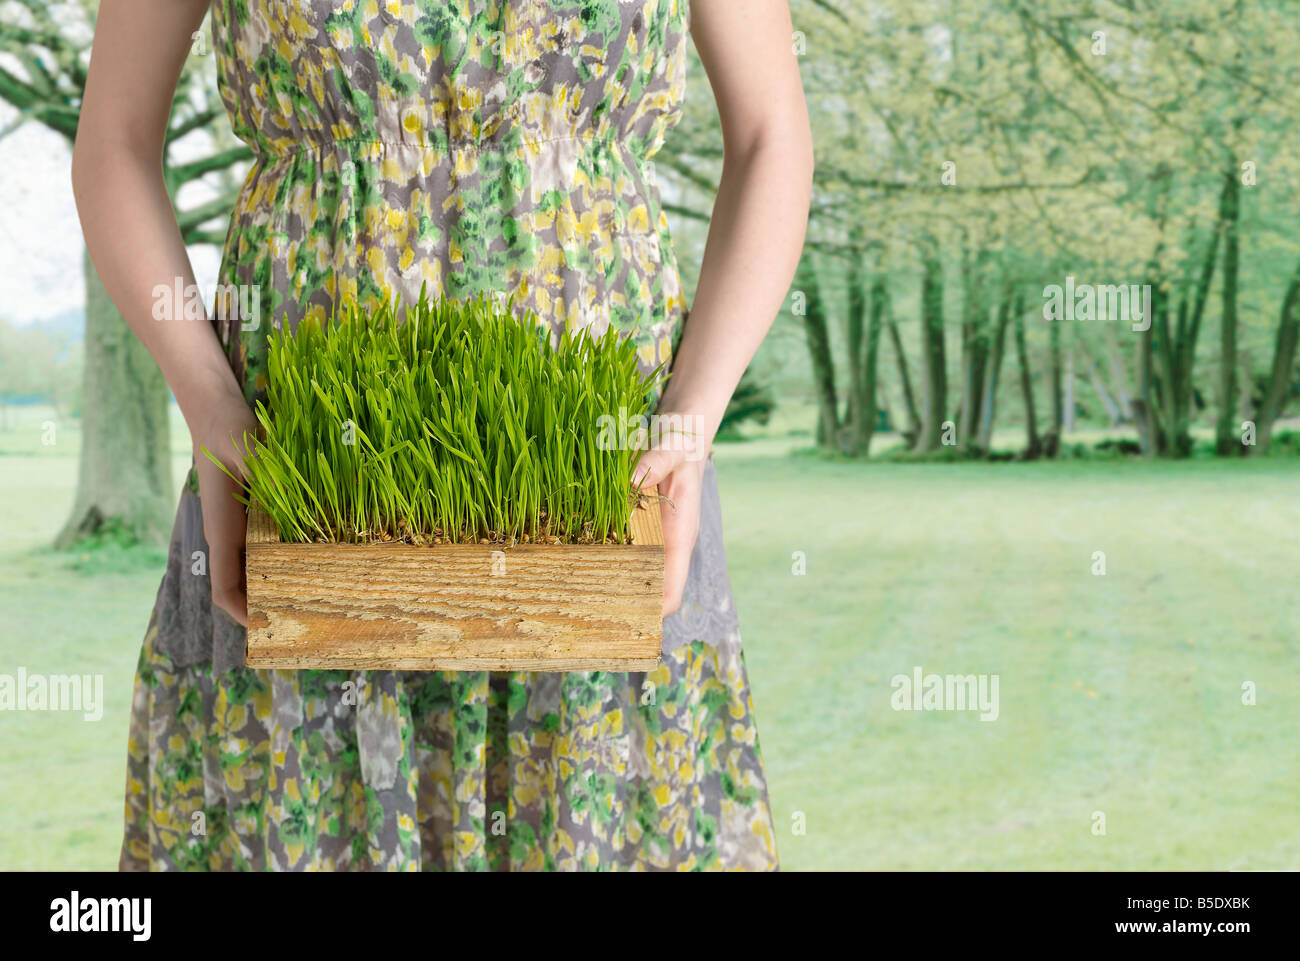 Young Woman Holding Box of Grass Banque D'Images